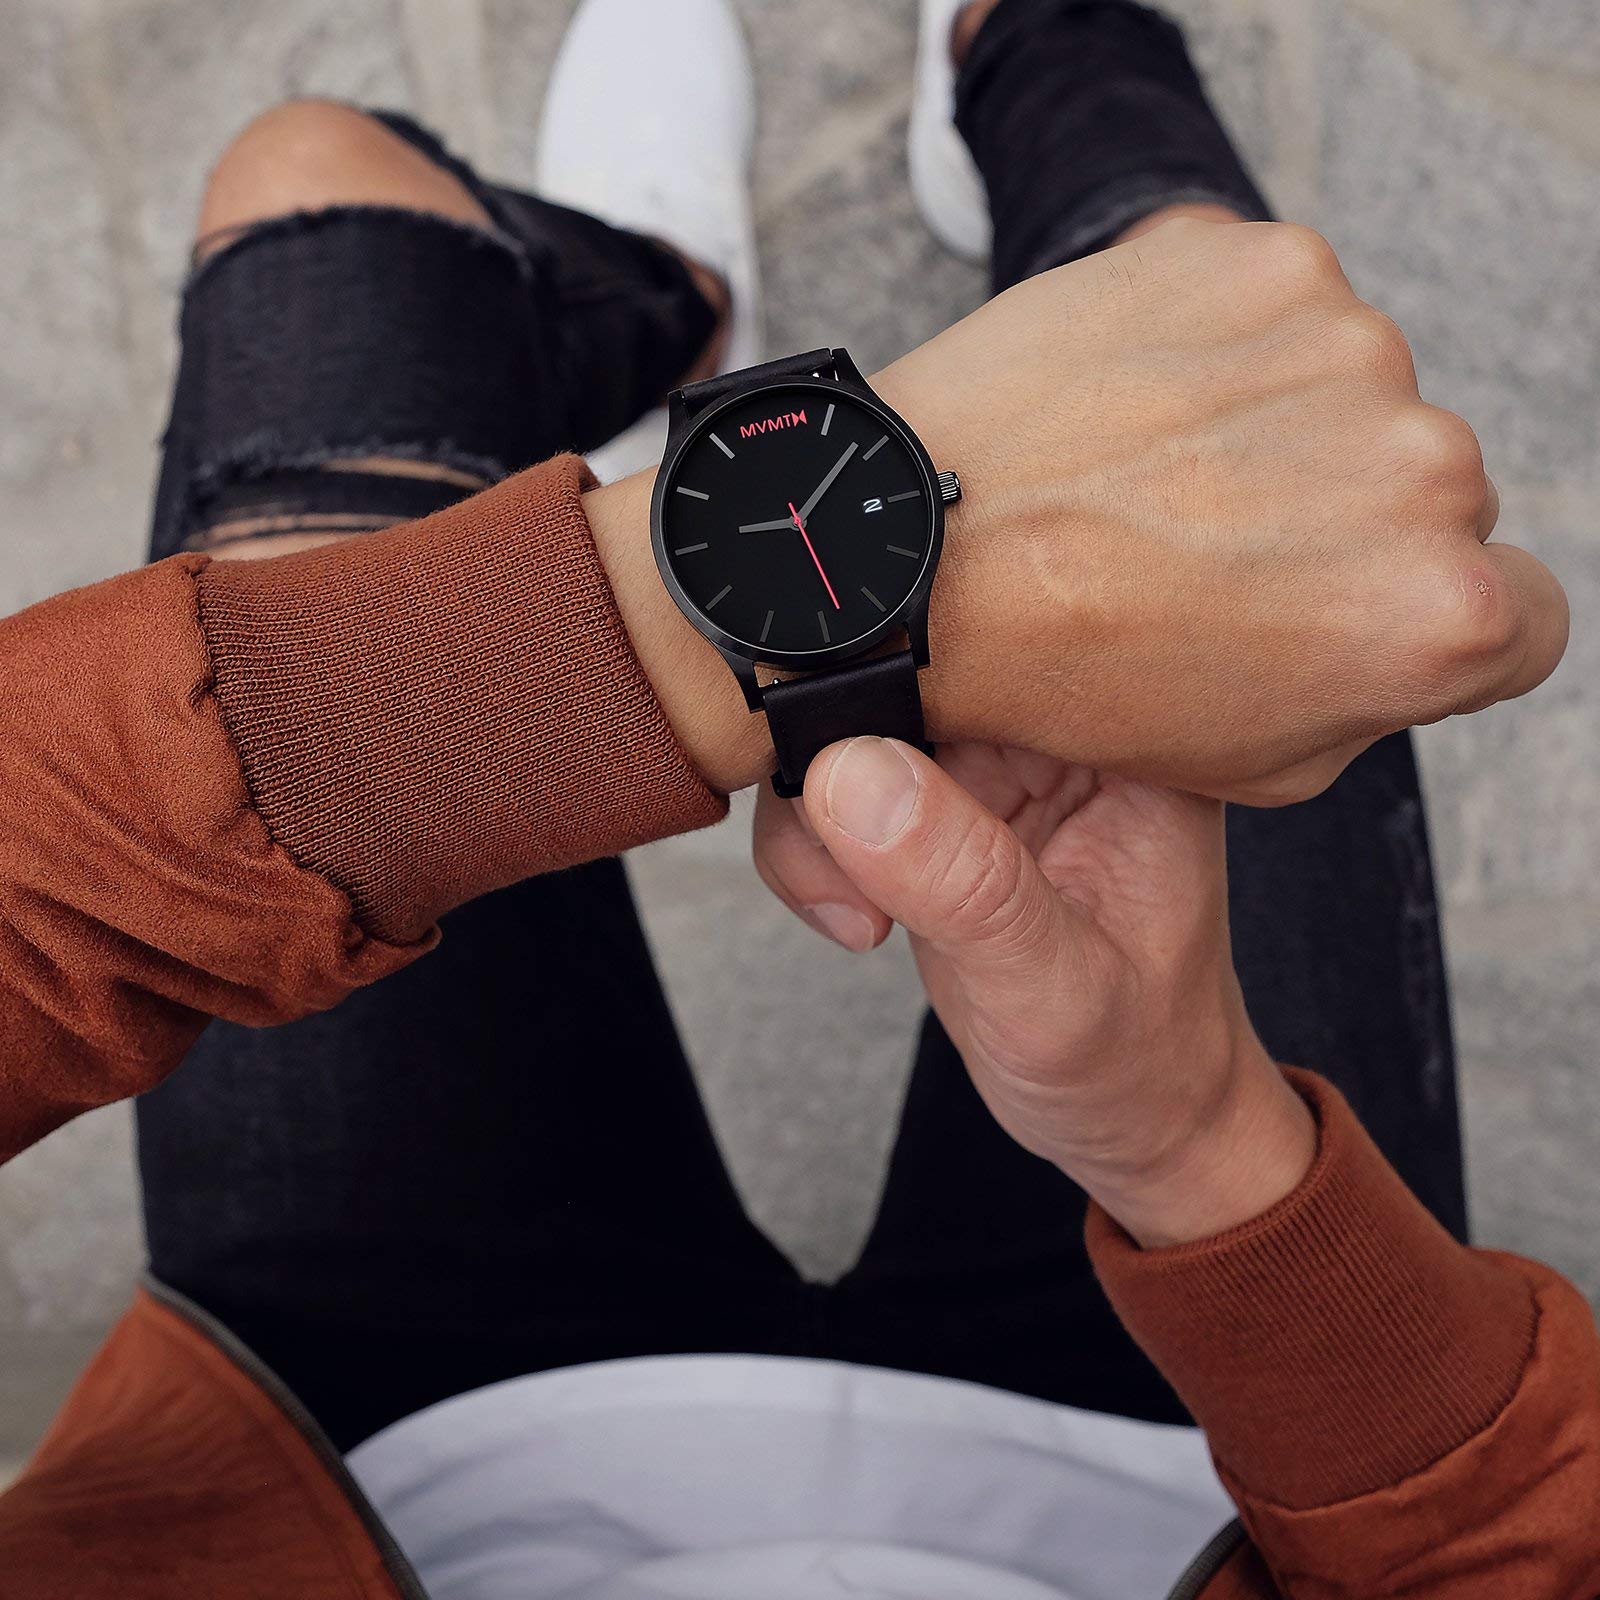 MVMT Classic Men's Analog Watches - Versatile Timepieces for Everyday Casual Wear with Stainless Steel and Leather Straps